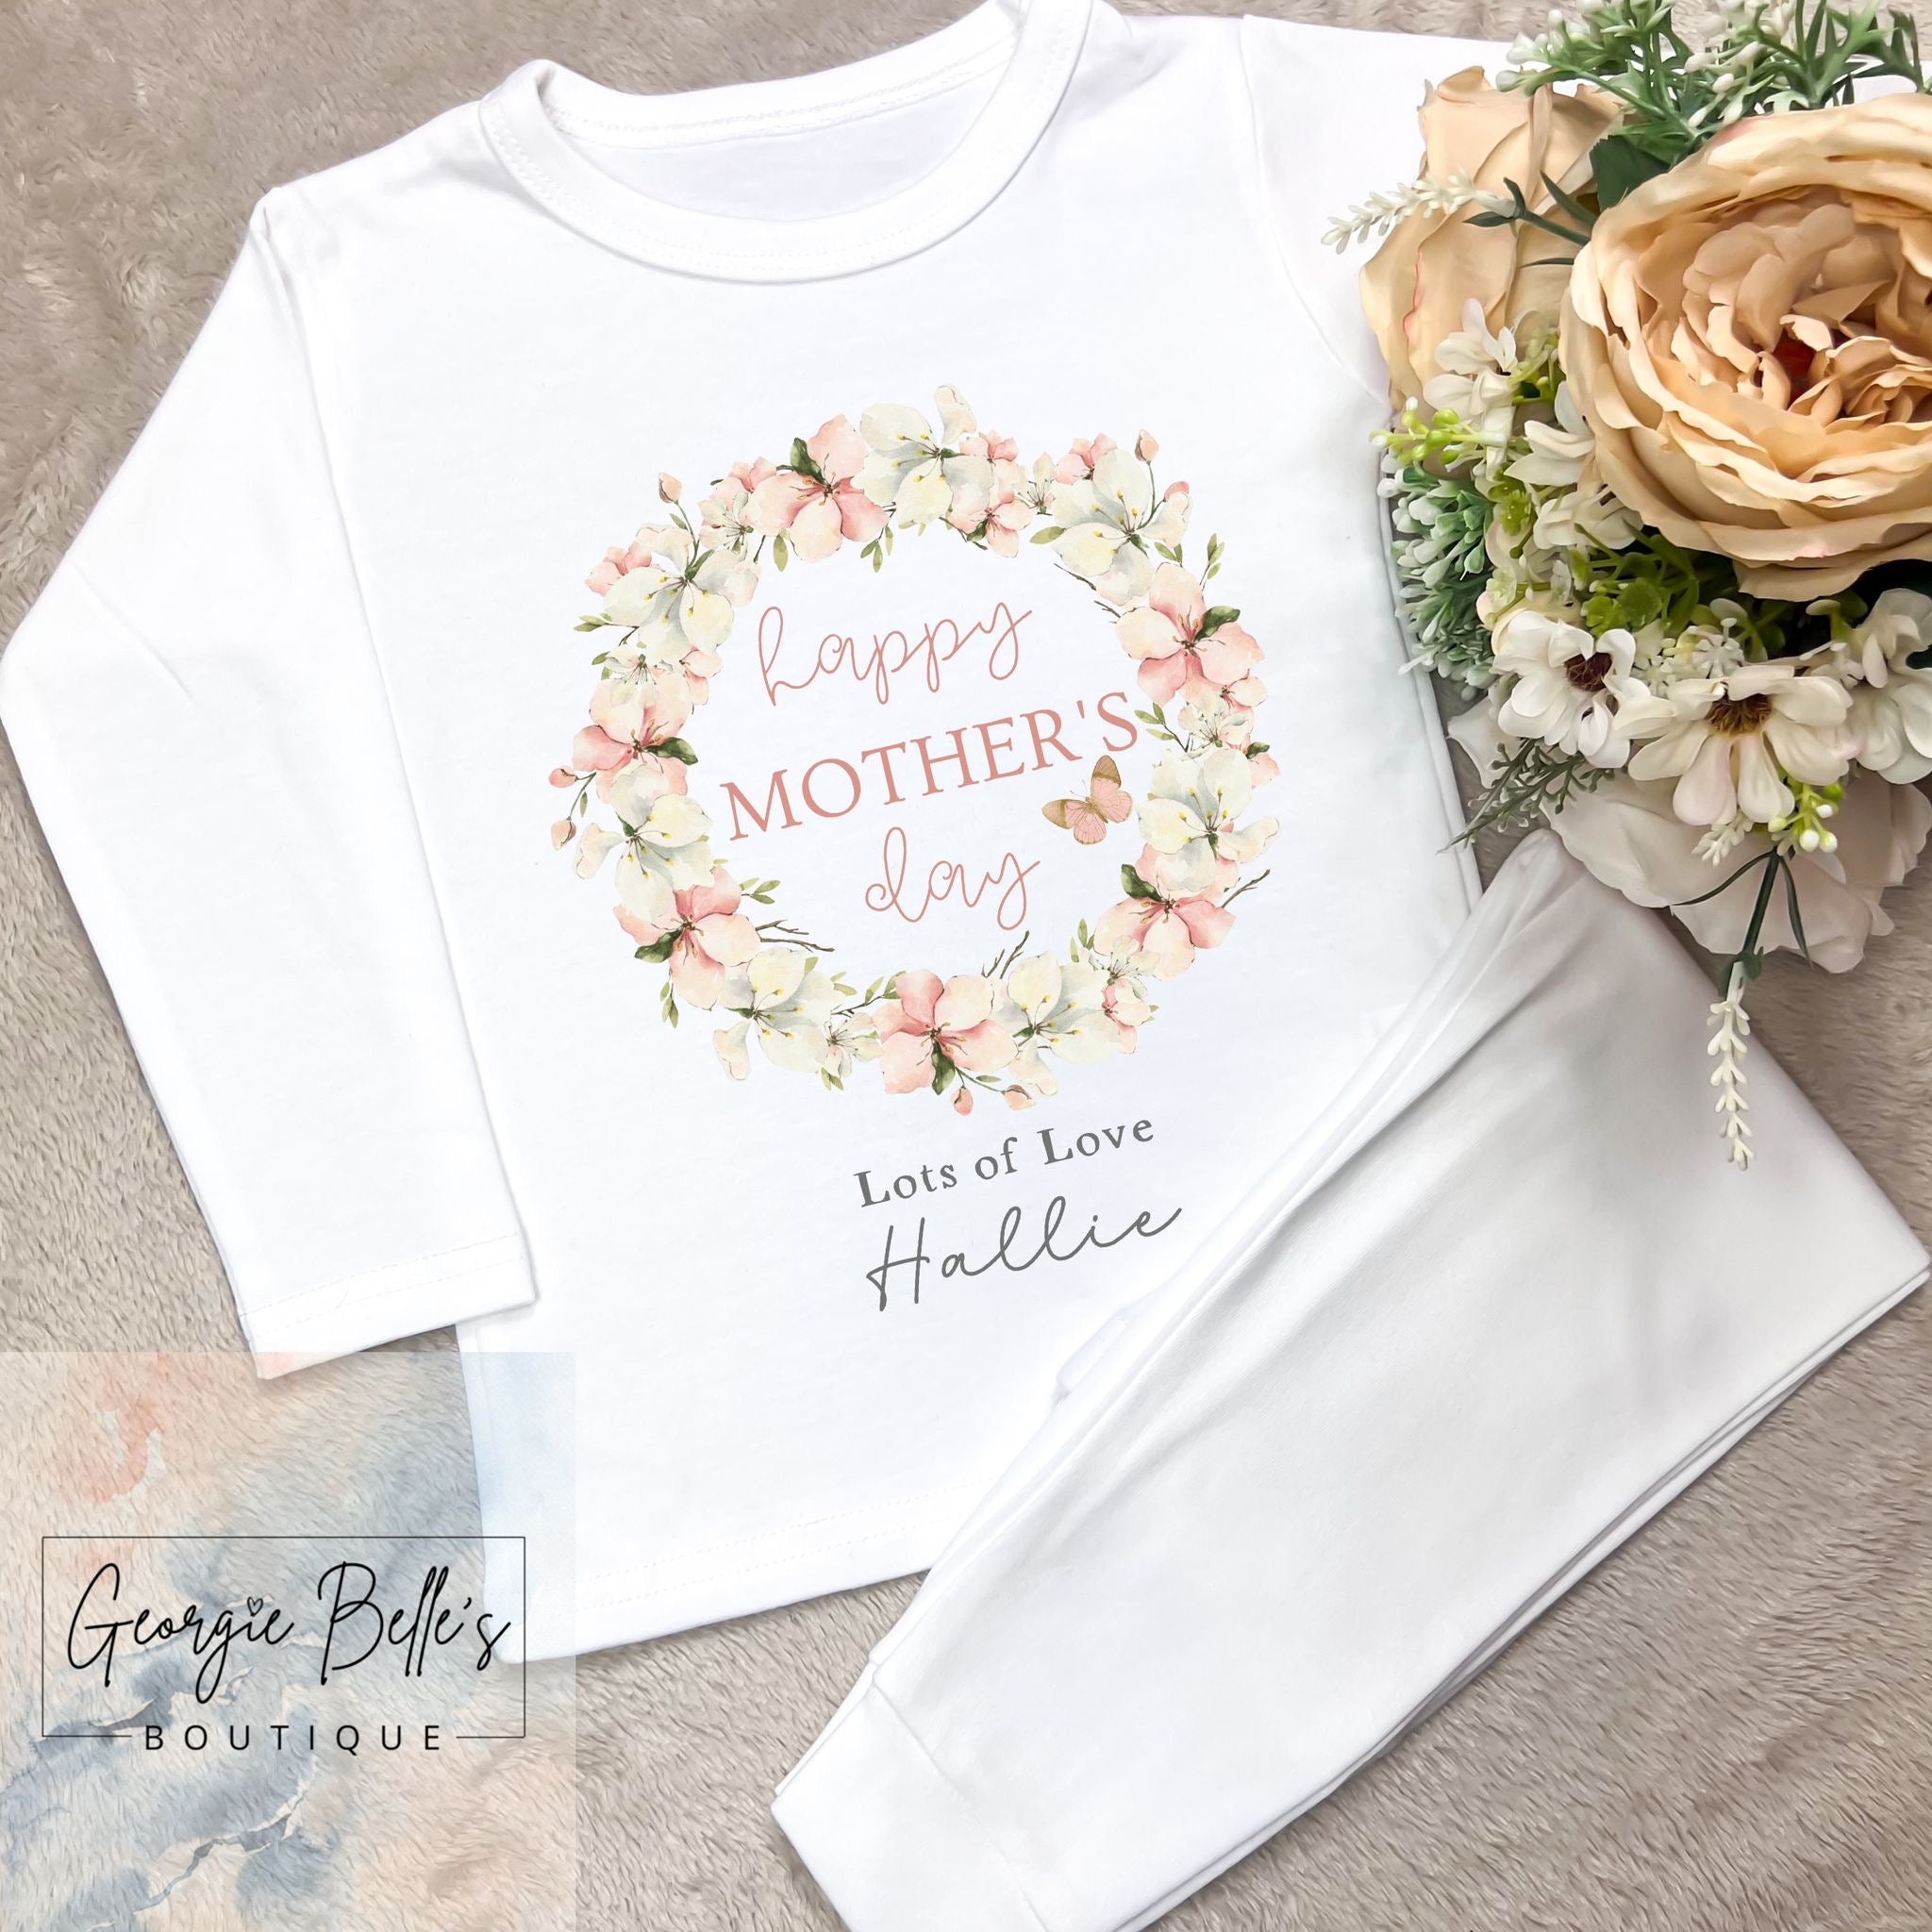 Personalised Mothers Day Pyjamas - Floral Wreath Design